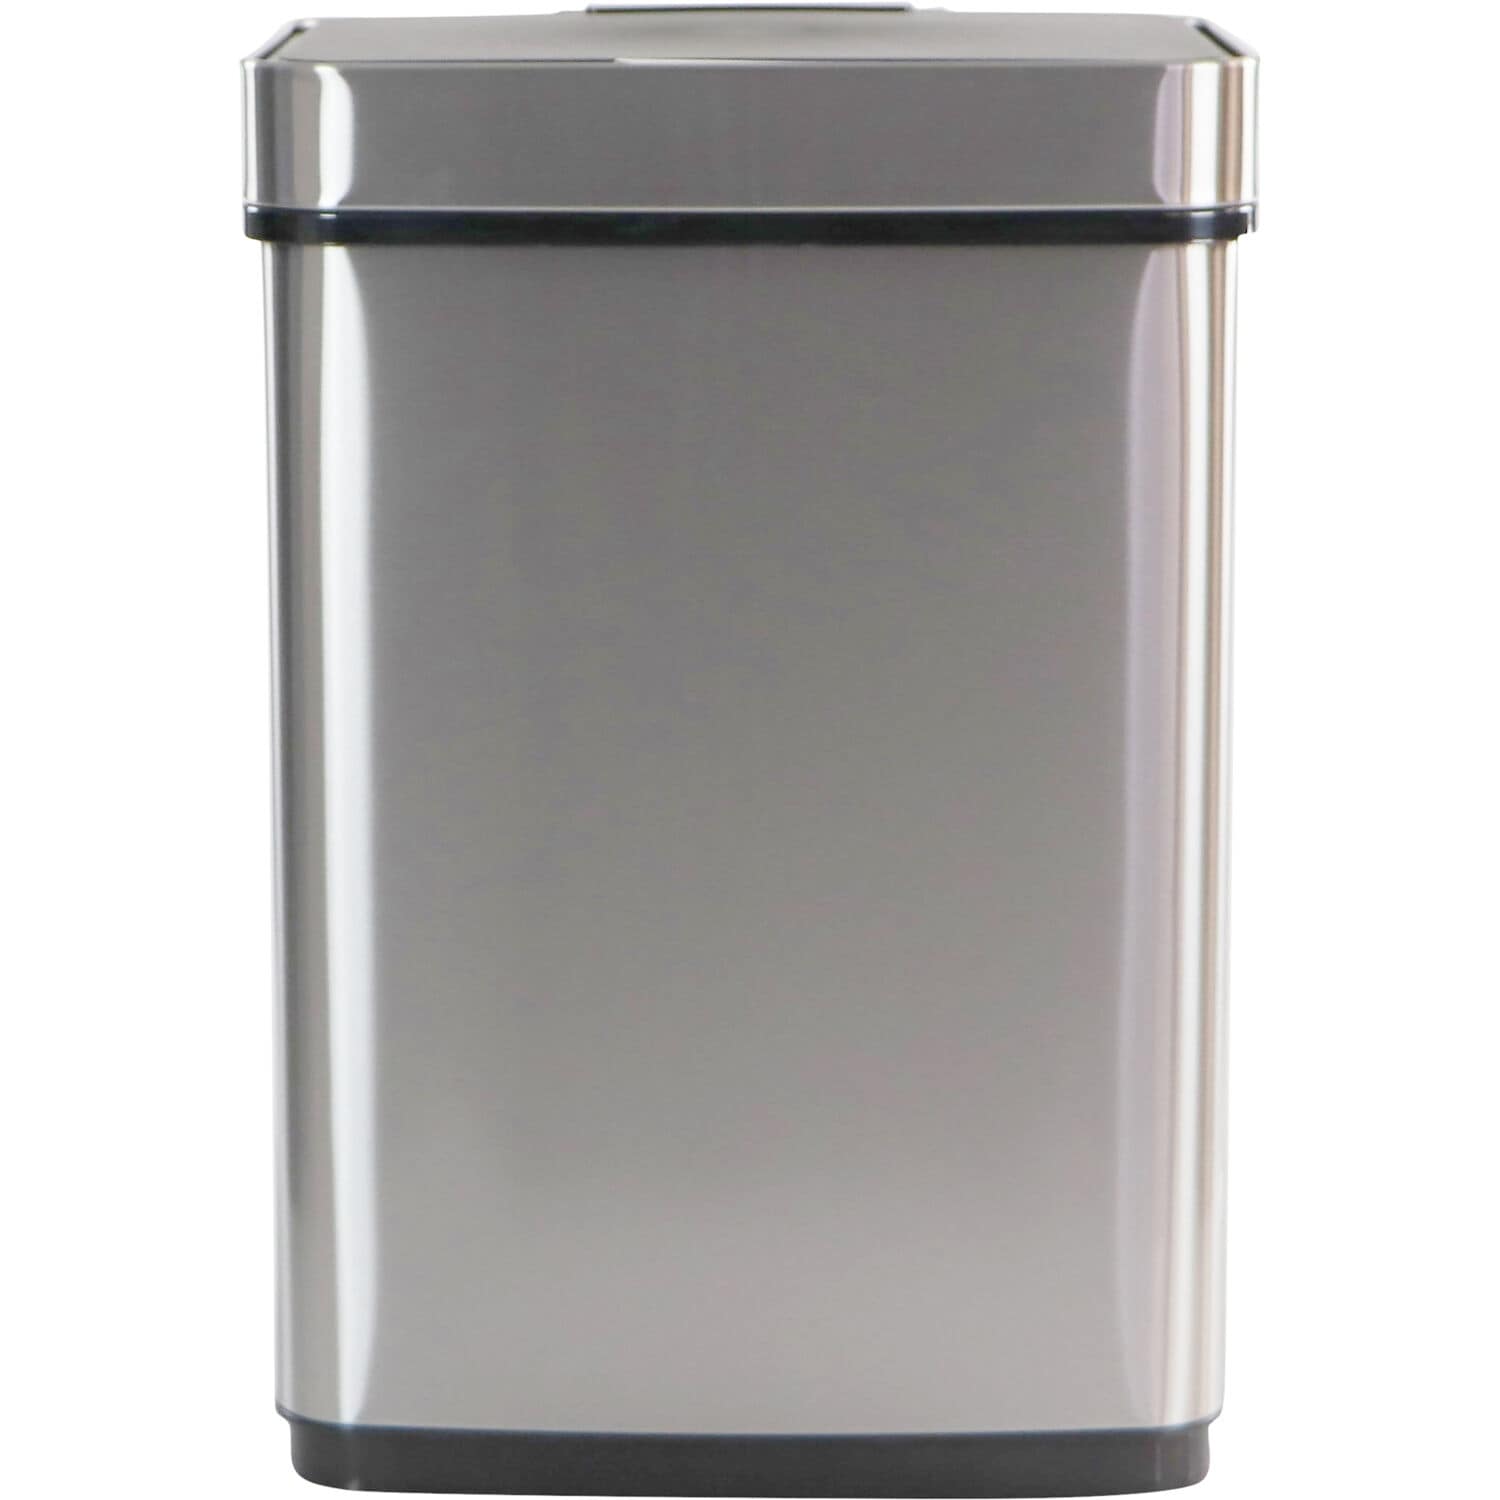 https://ak1.ostkcdn.com/images/products/is/images/direct/0ca800100db3041974a82e186206081f6ad5b2cd/Hanover-50-Liter---13.2-Gallon-Trash-Can-with-Sensor-Lid-in-Stainless-Steel.jpg